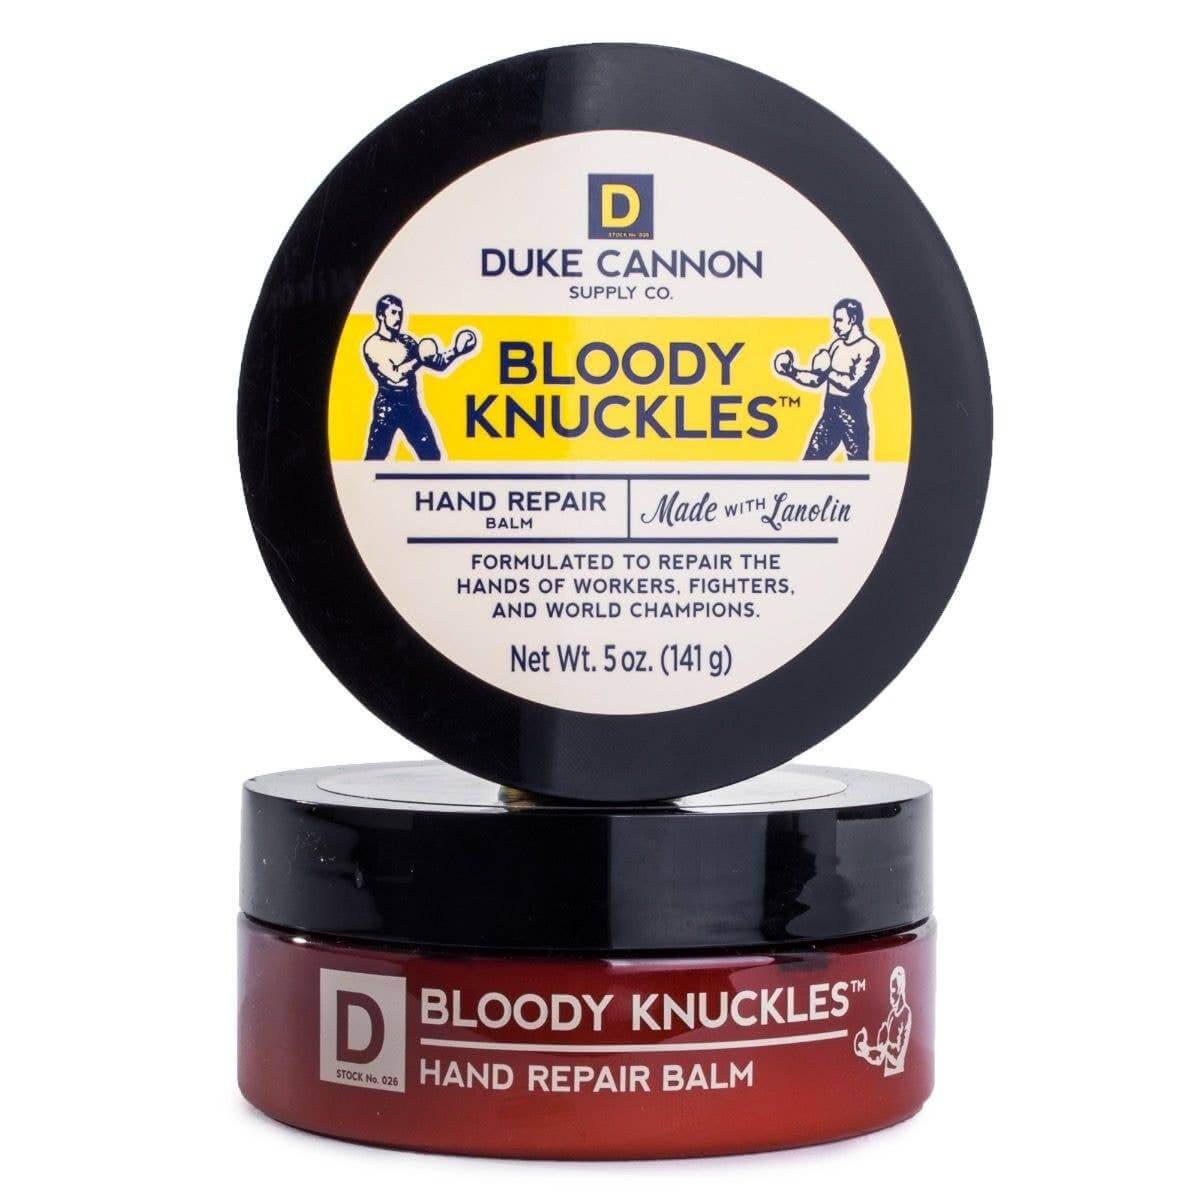 Duke Cannon Bloody Knuckles Hndcreme